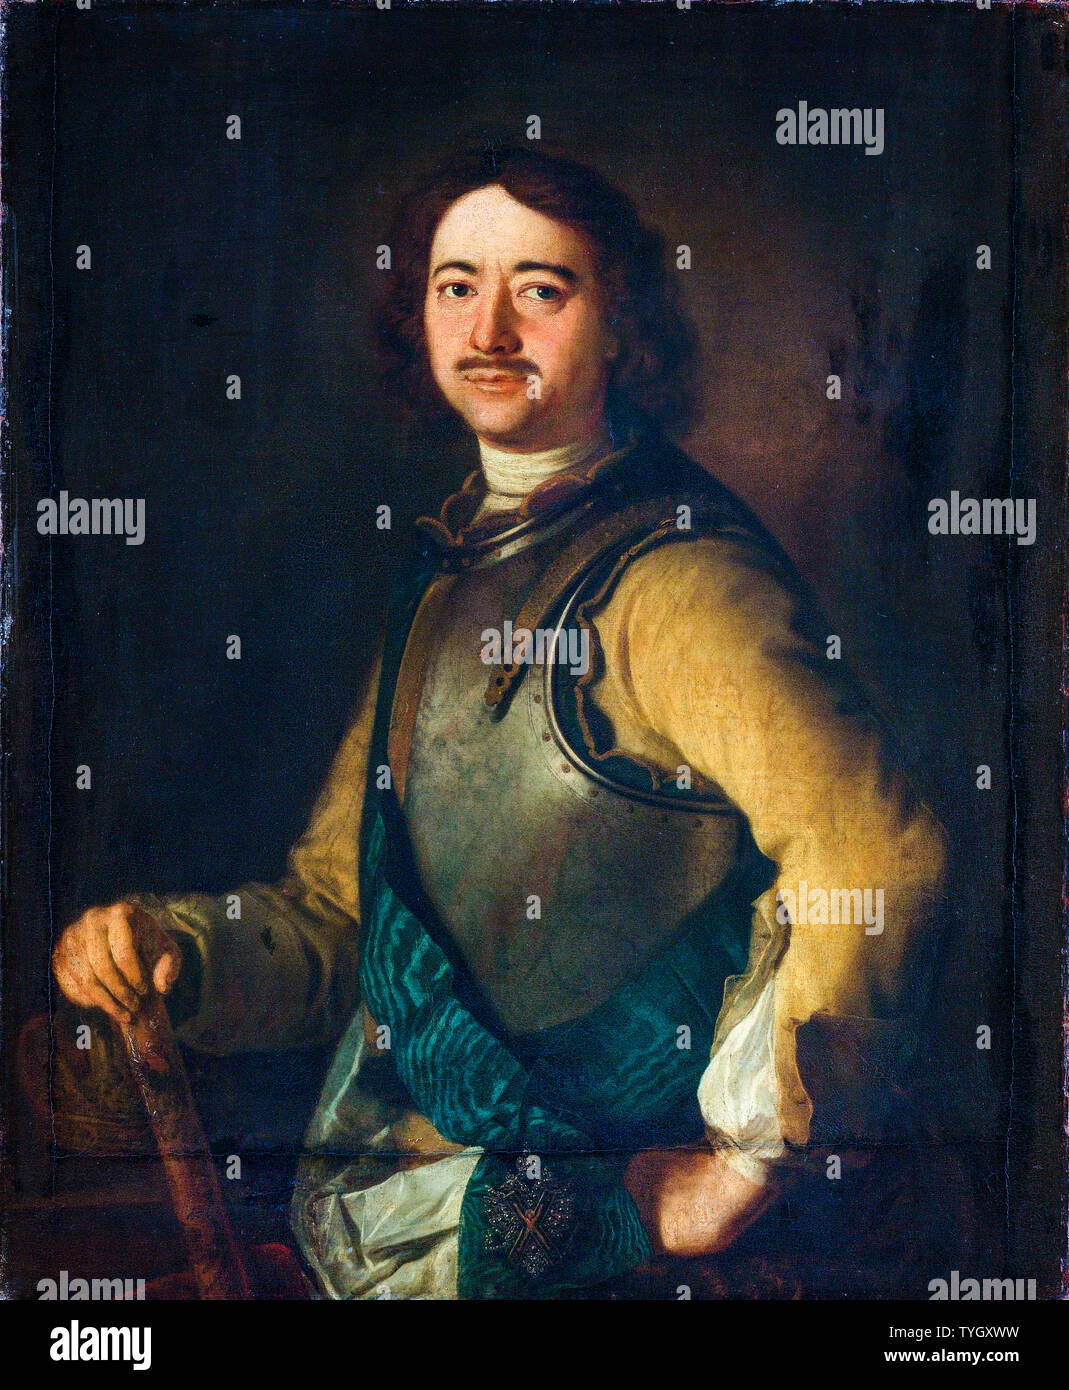 Tsar Peter the Great of Russia, 1672-1725, portrait painting, 1700-1750 Stock Photo